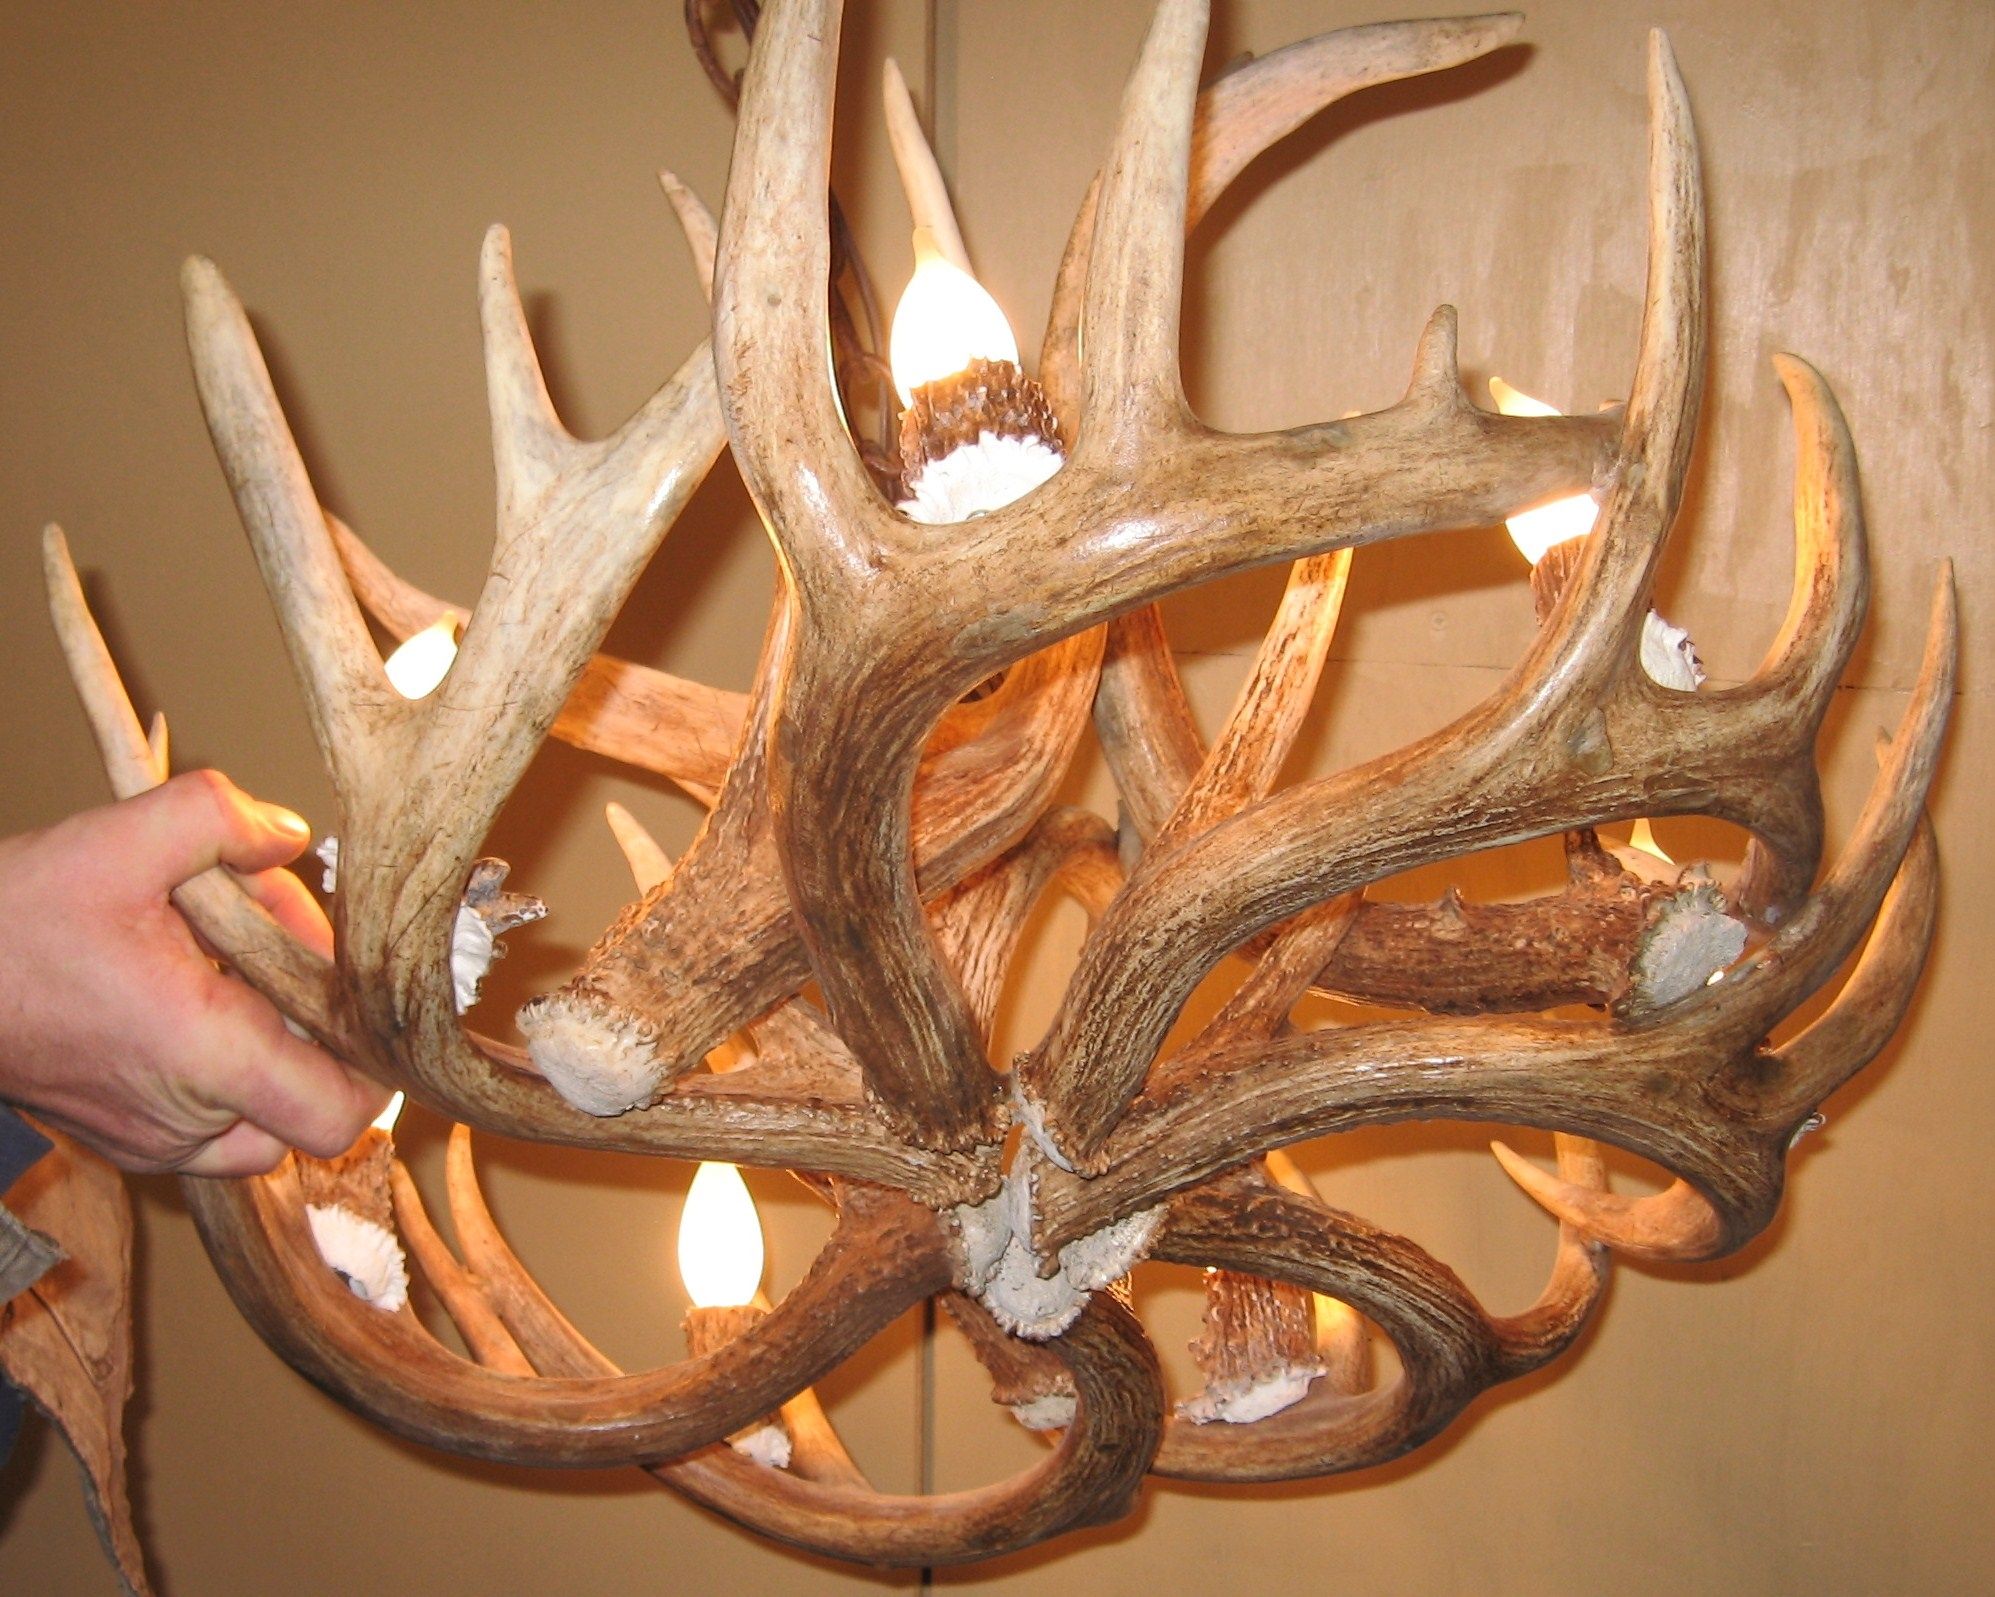 Round Whitetail Deer Antler Chandelier Within Antler Chandeliers And Lighting (View 9 of 15)